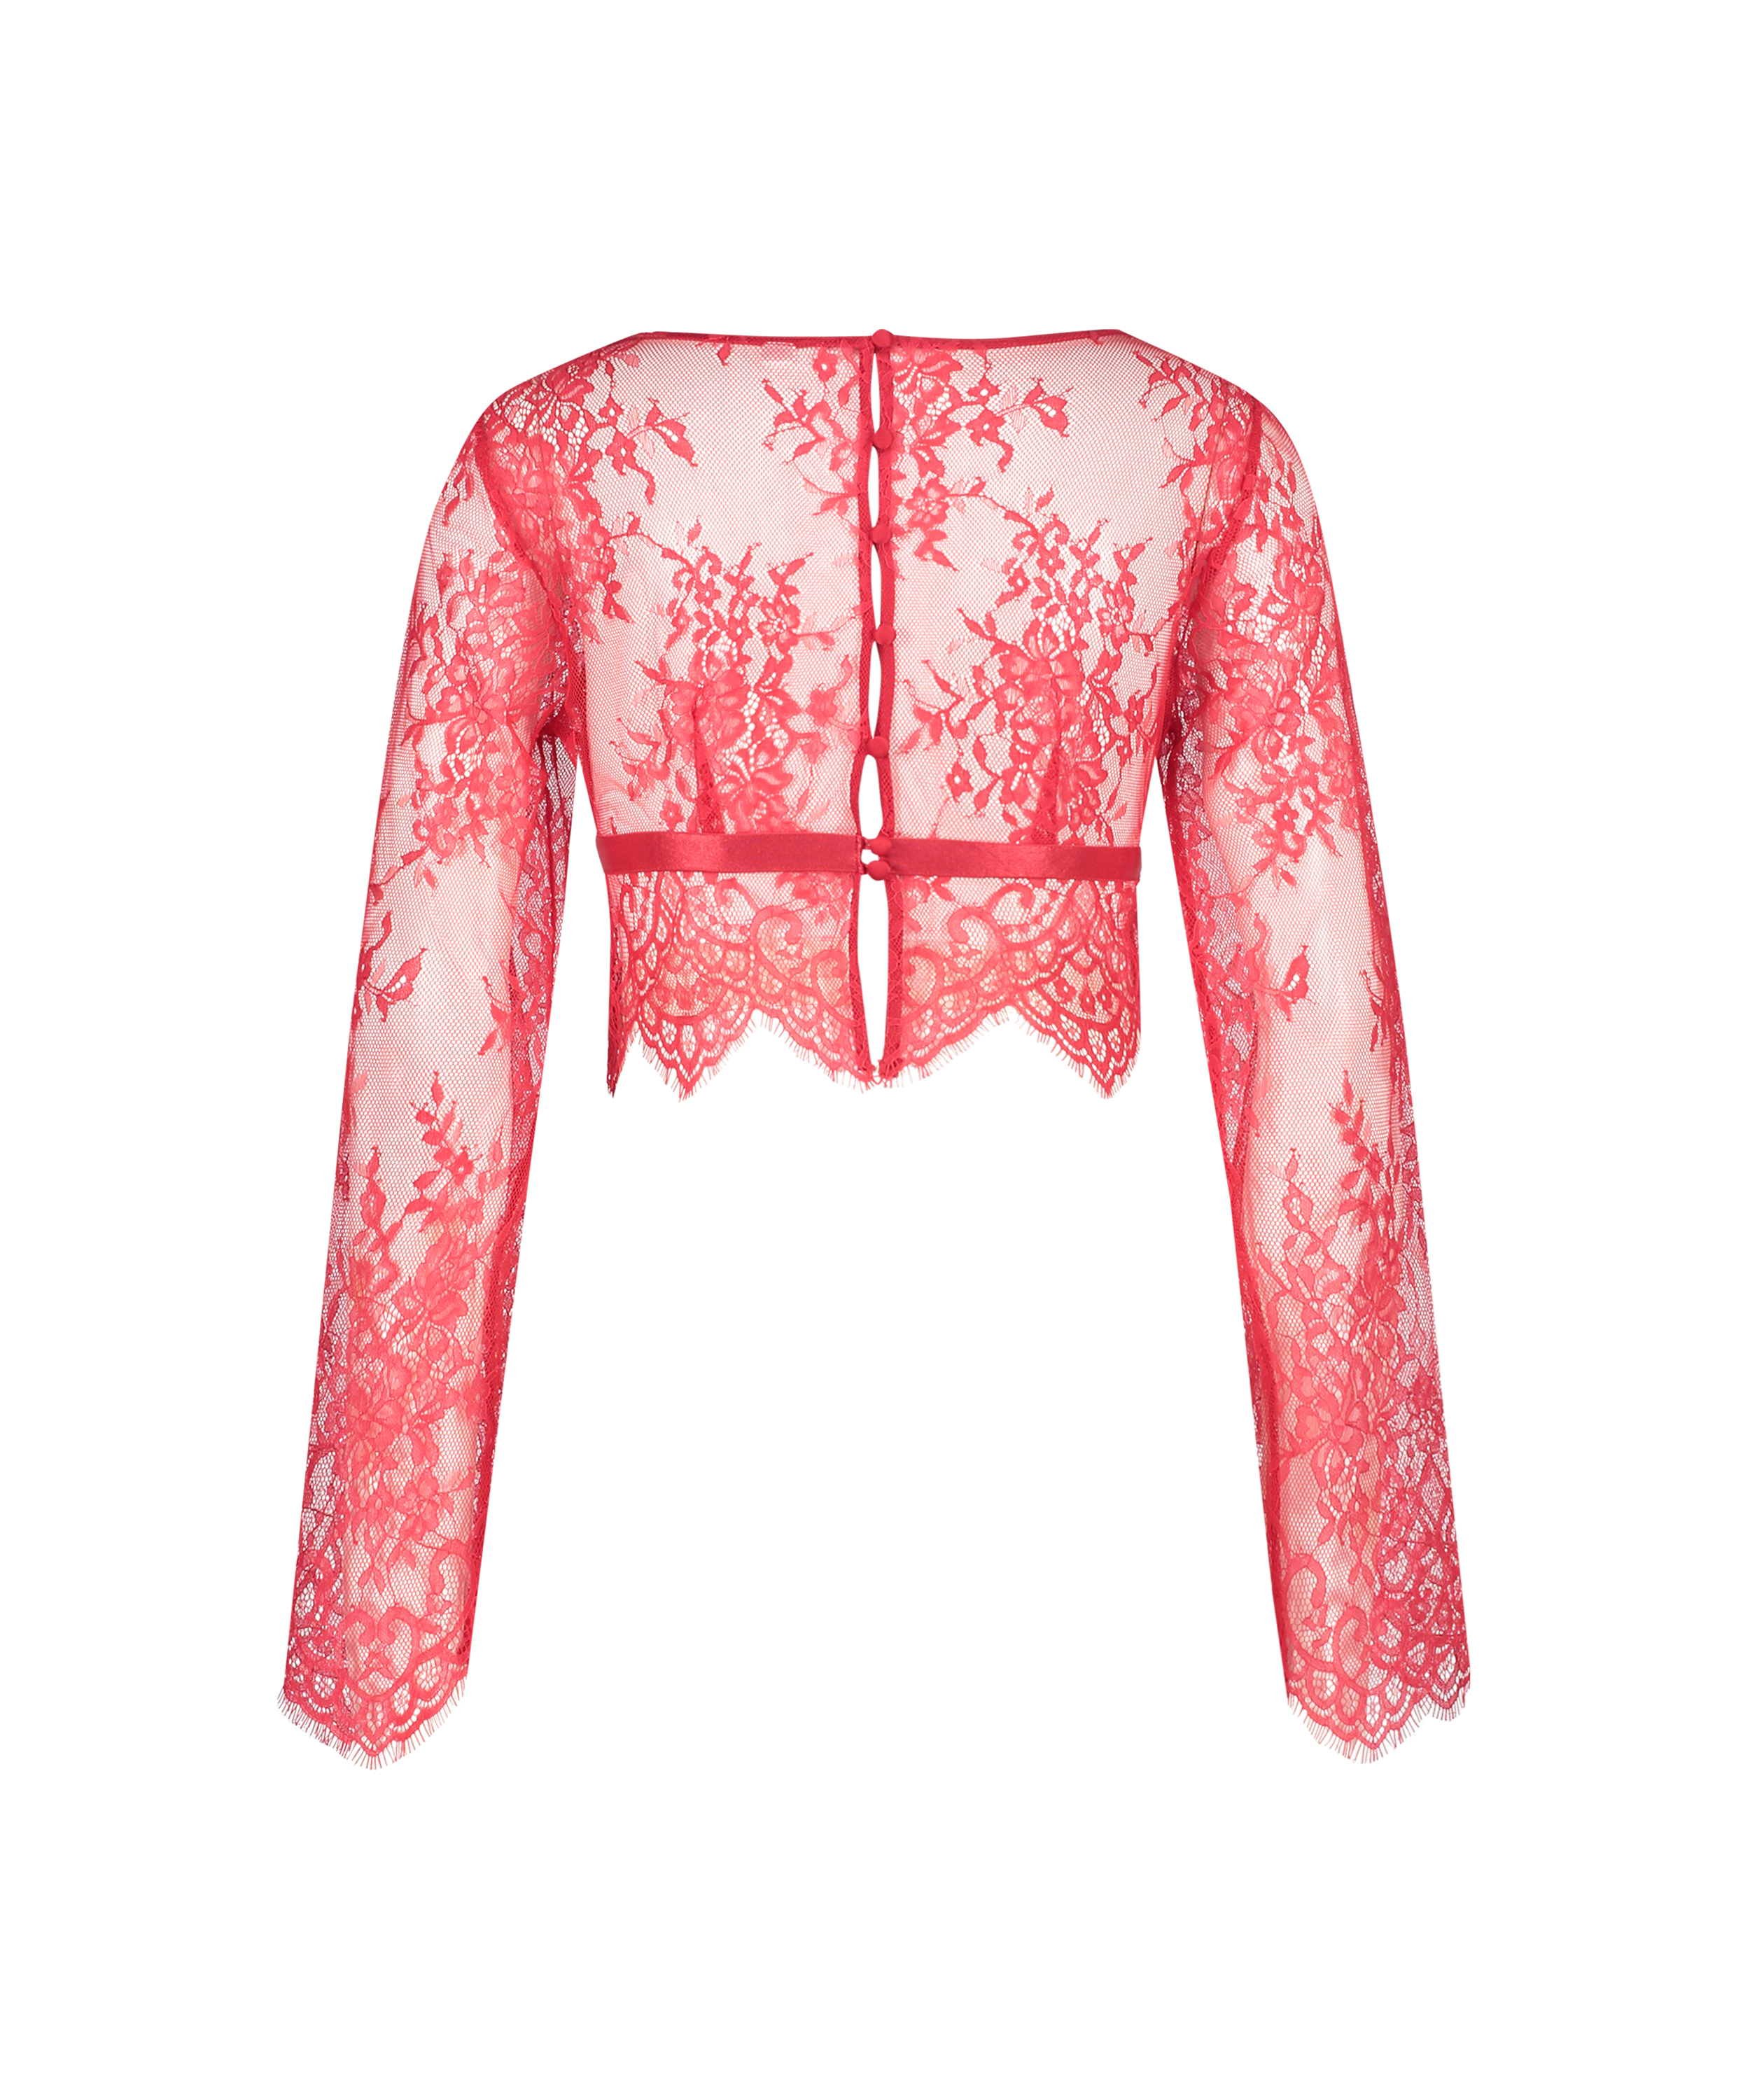 All-over Lace Top, Red, main